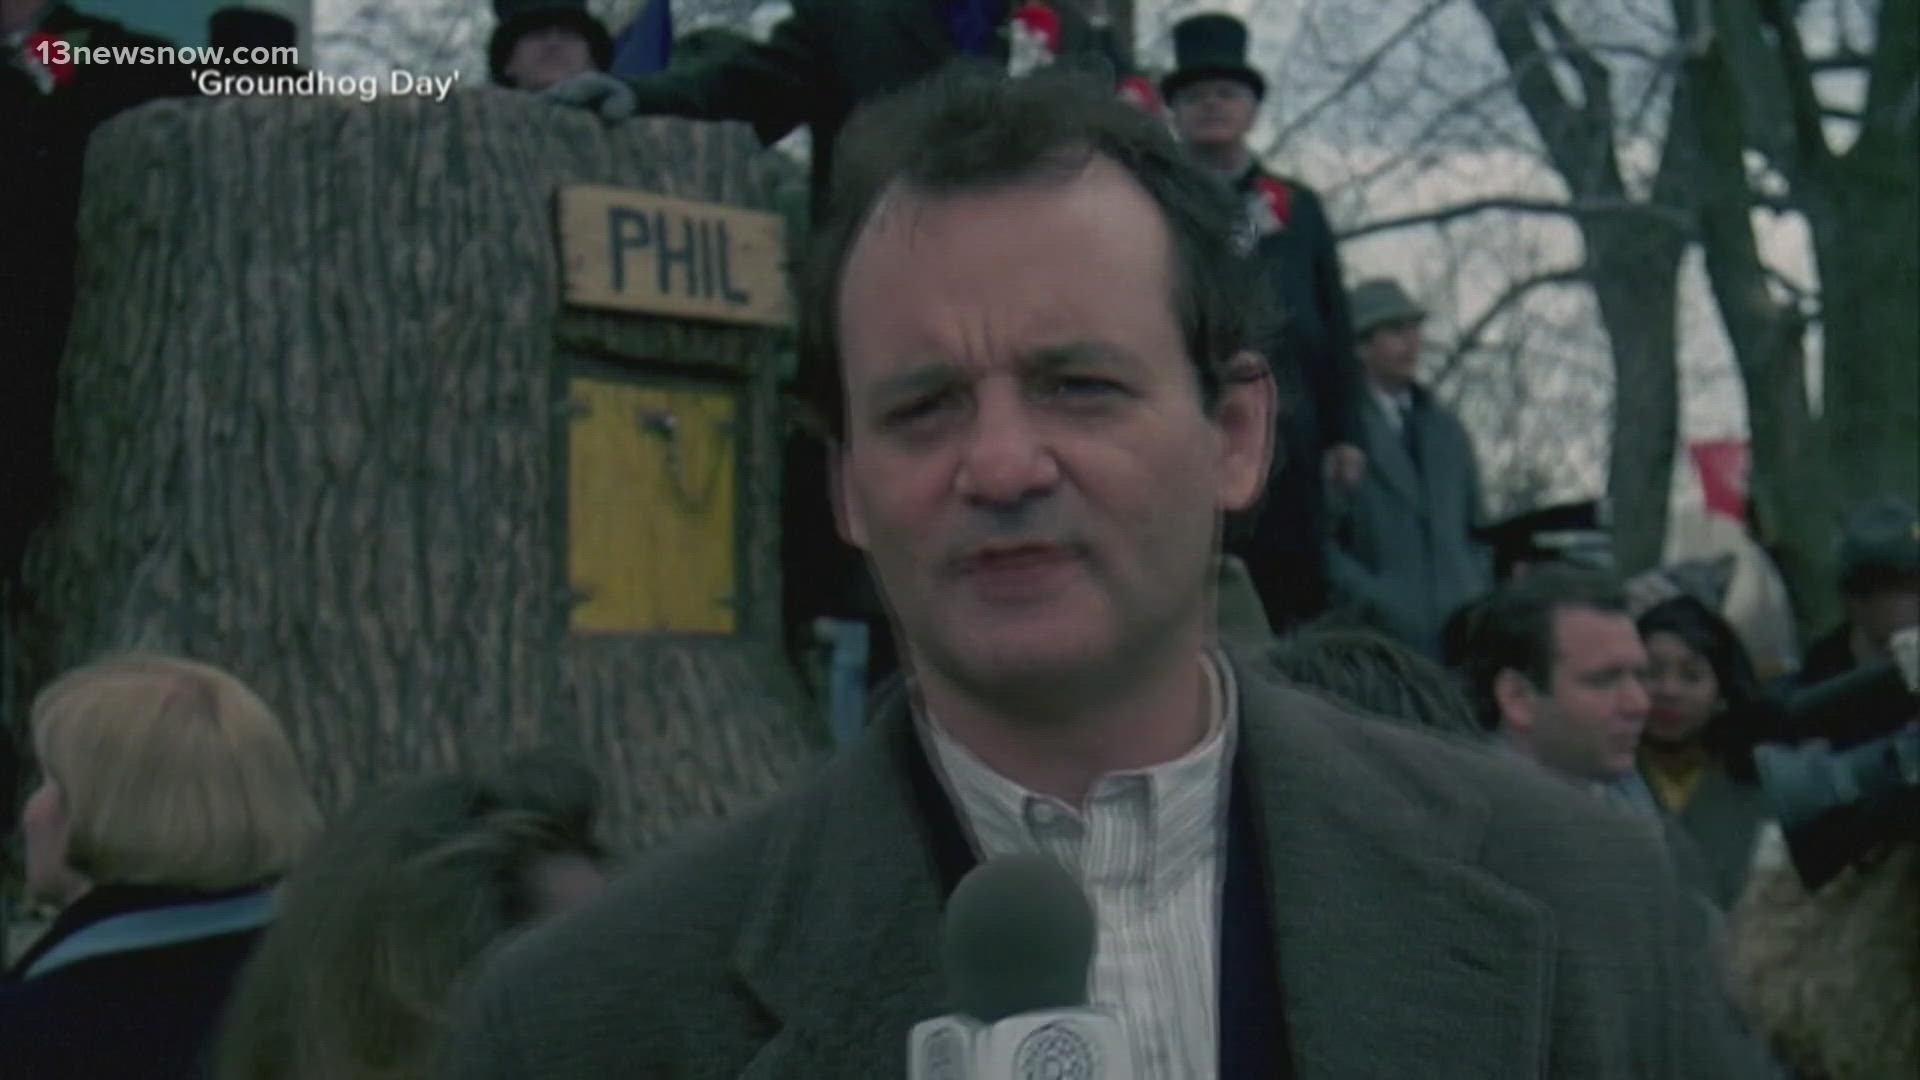 Bill Murray and Andie MacDowell may have done more to cement Groundhog Day on the calendar than Punxsutawney Phil himself.